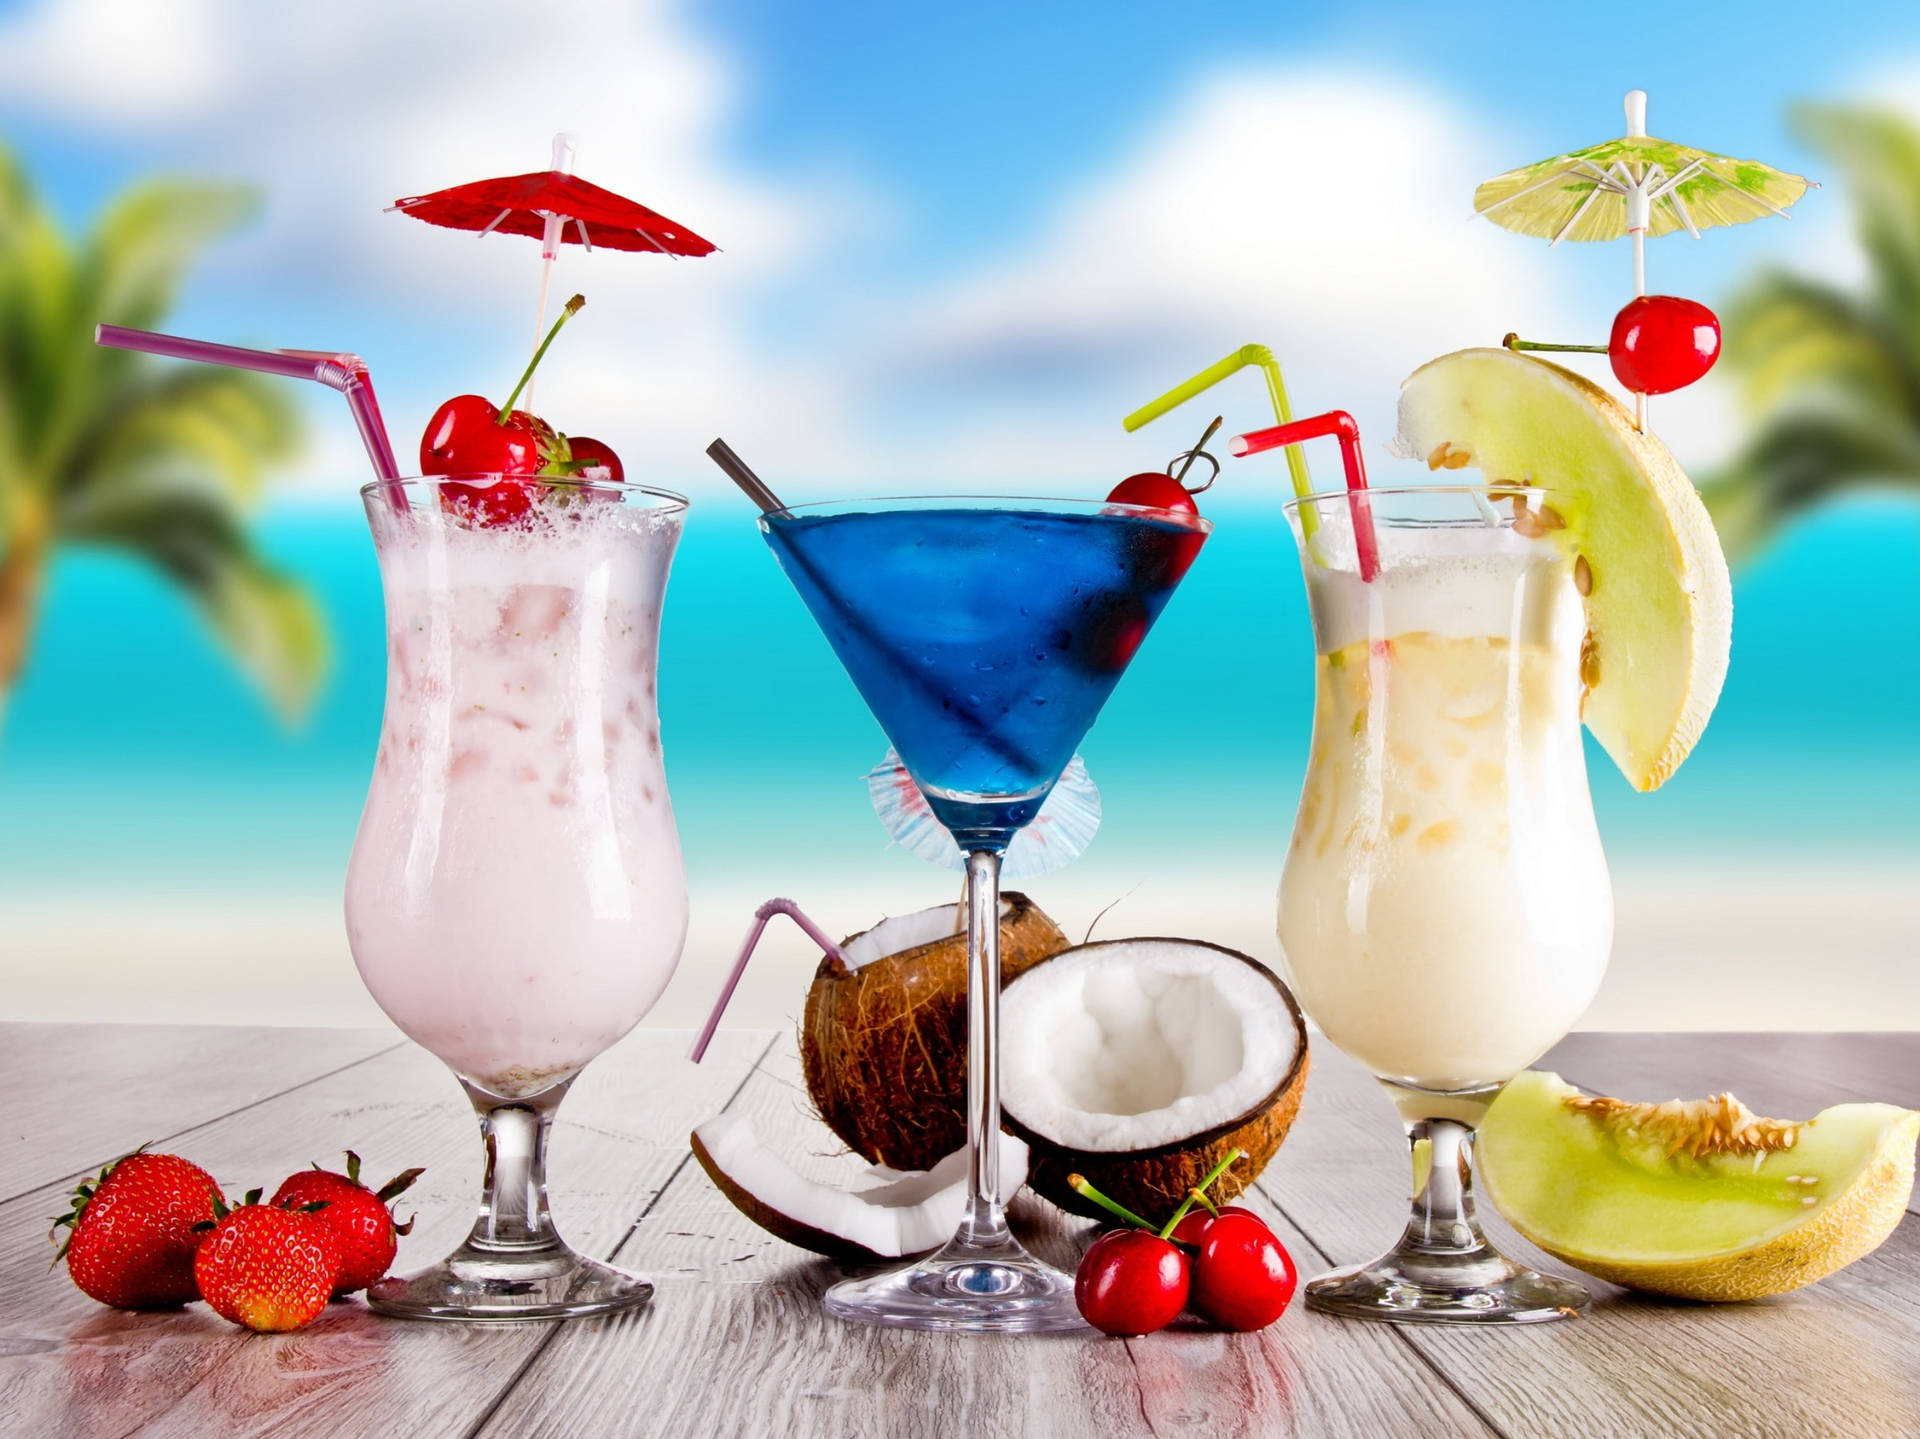 Melon, Berry, Blue Curacao Tropical Drinks Background